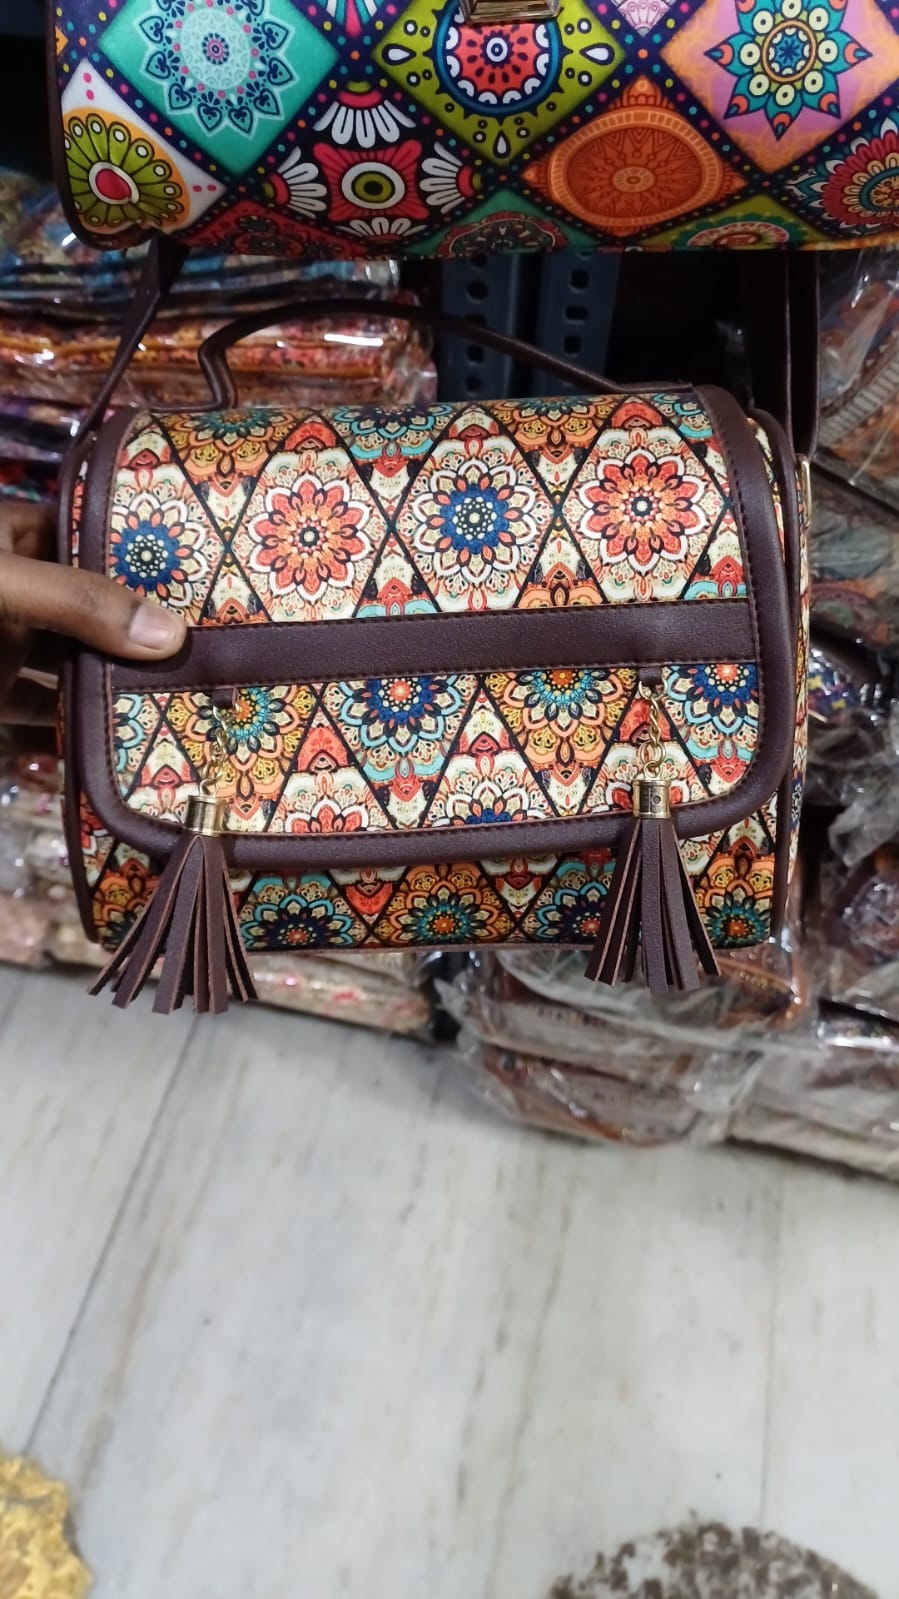 Printed Cluth styled Bag